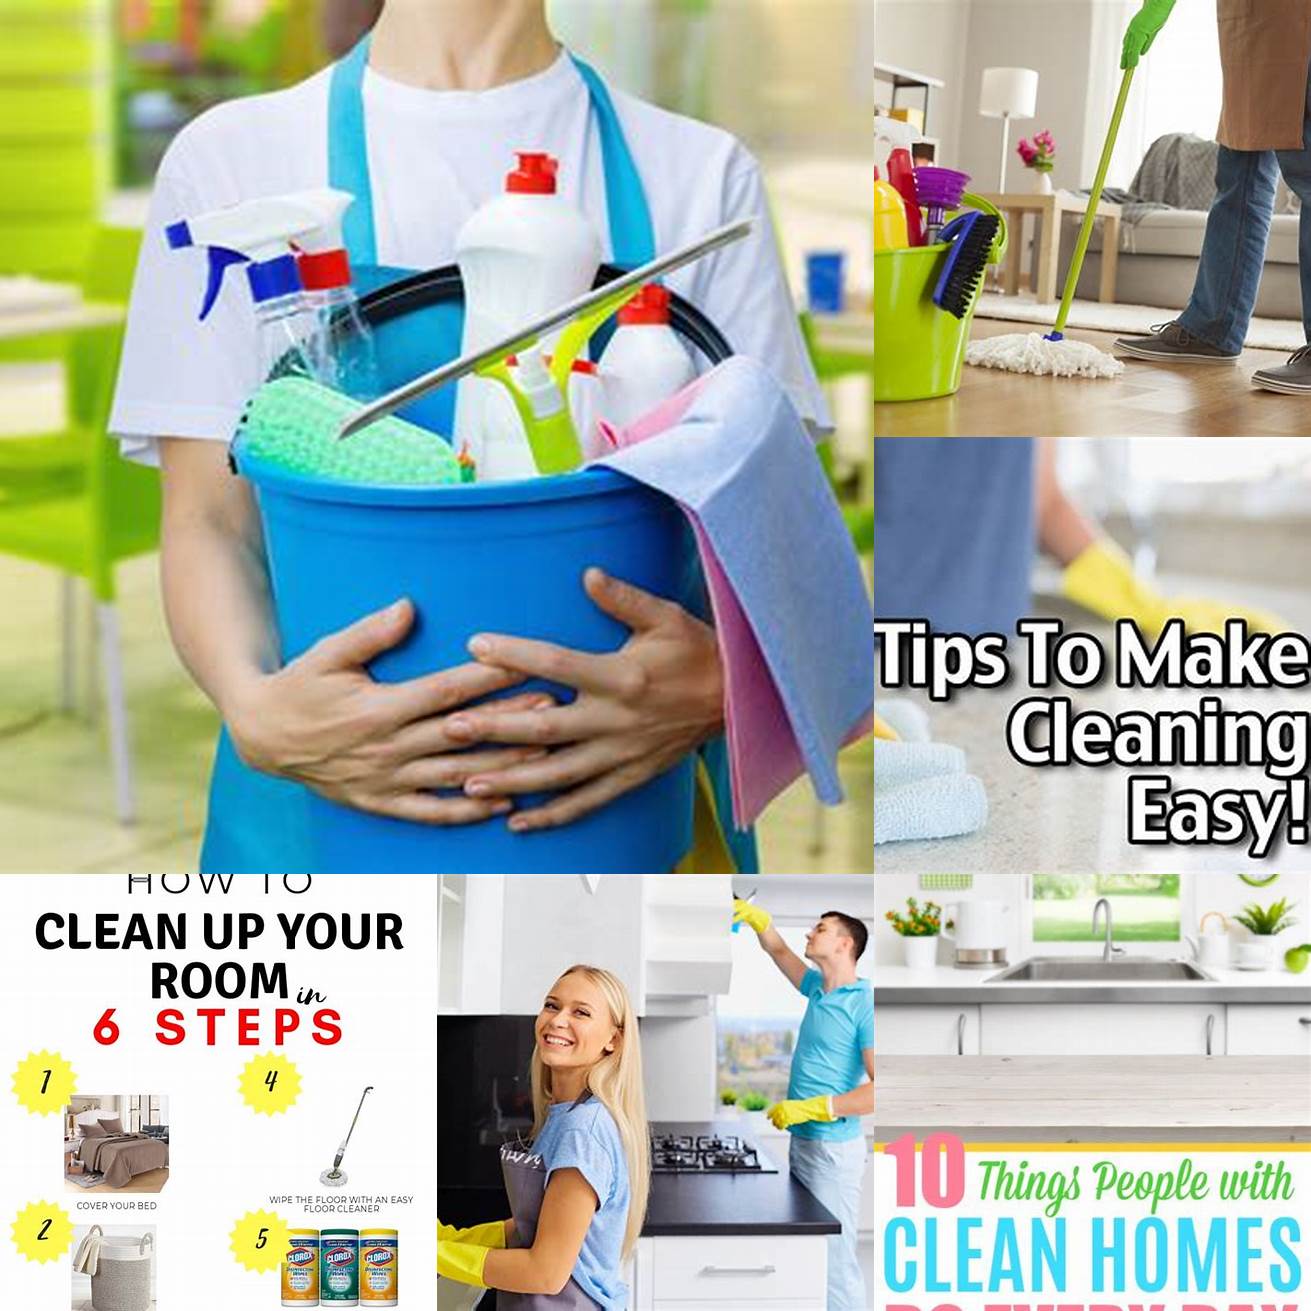 5 Choose pieces that are easy to clean